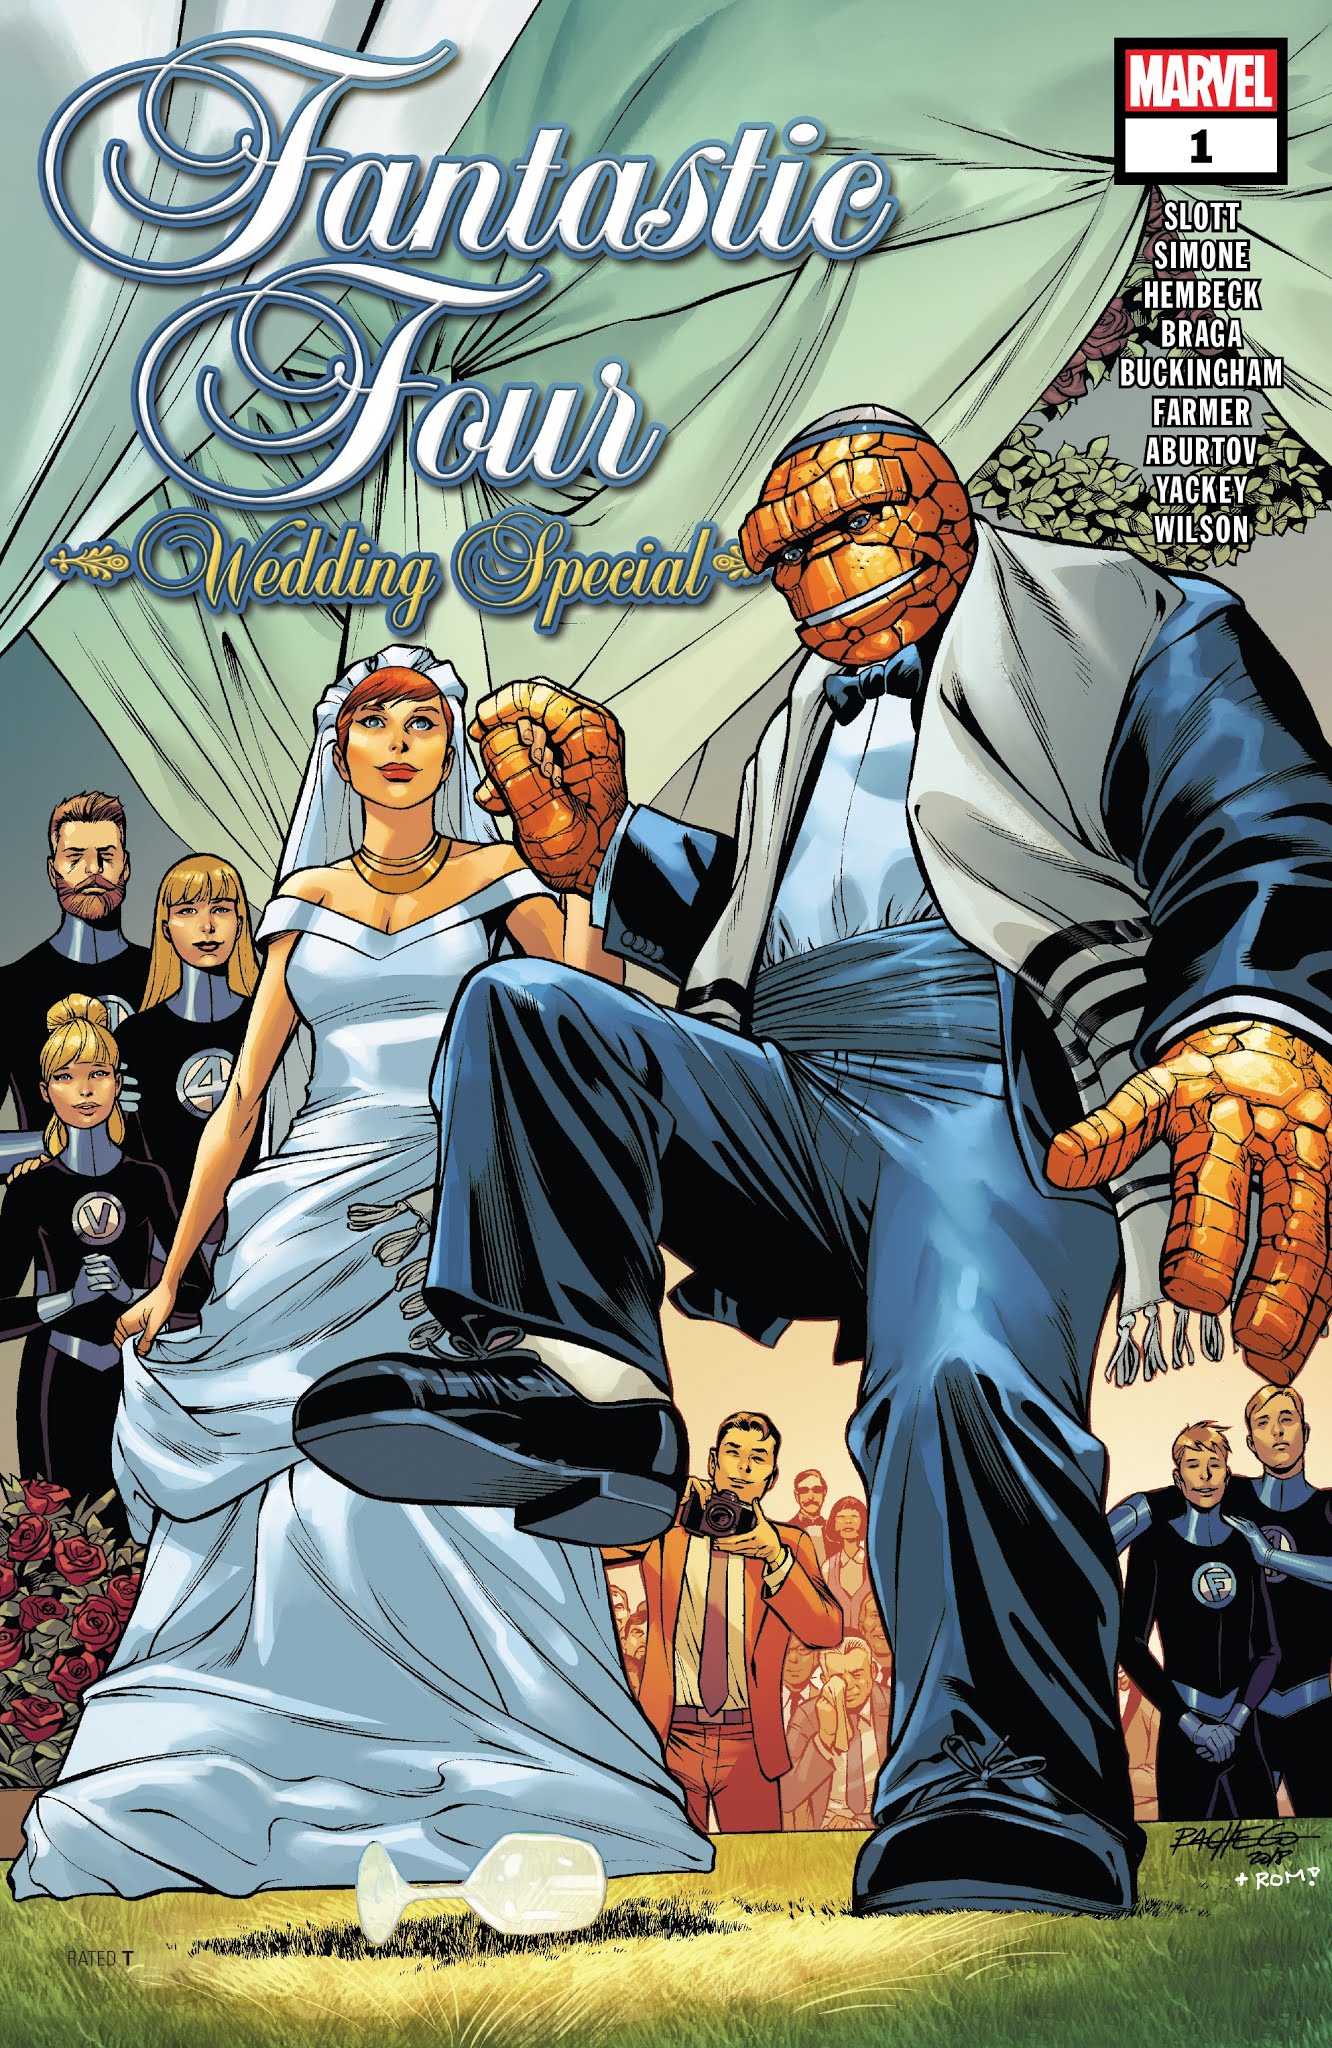 Read online Fantastic Four: Wedding Special comic -  Issue # Full - 1